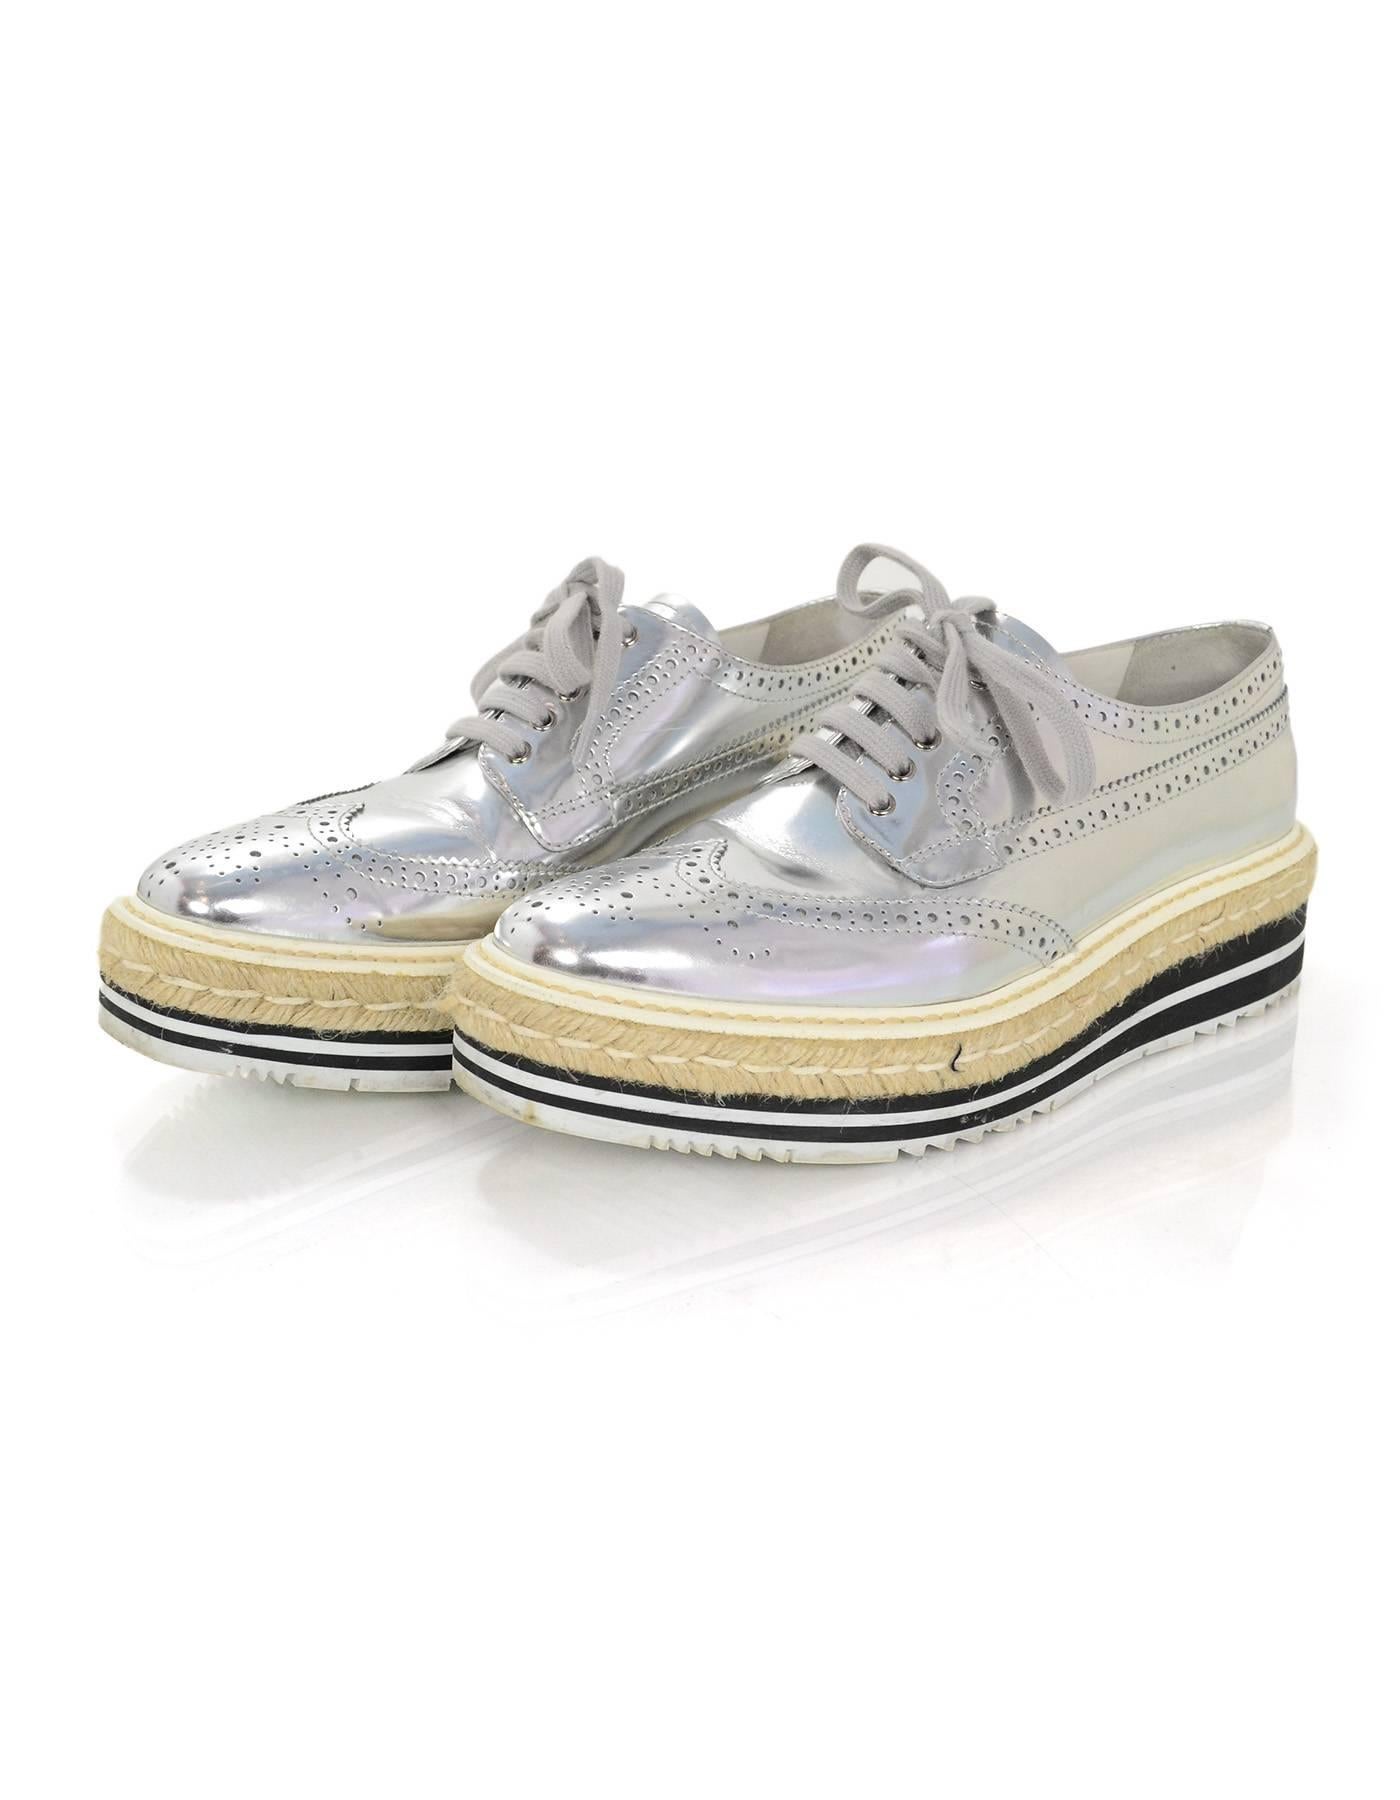 Prada Silver Perforated Oxford Creeper Brogue Espadrilles Sz 38

Made In: Italy
Color: Silver
Materials: Leather, jute rope, rubber
Closure/Opening: Lace tie closure
Sole Stamp: Prada
Retail Price: $950 + tax
Overall Condition: Excellent pre-owned